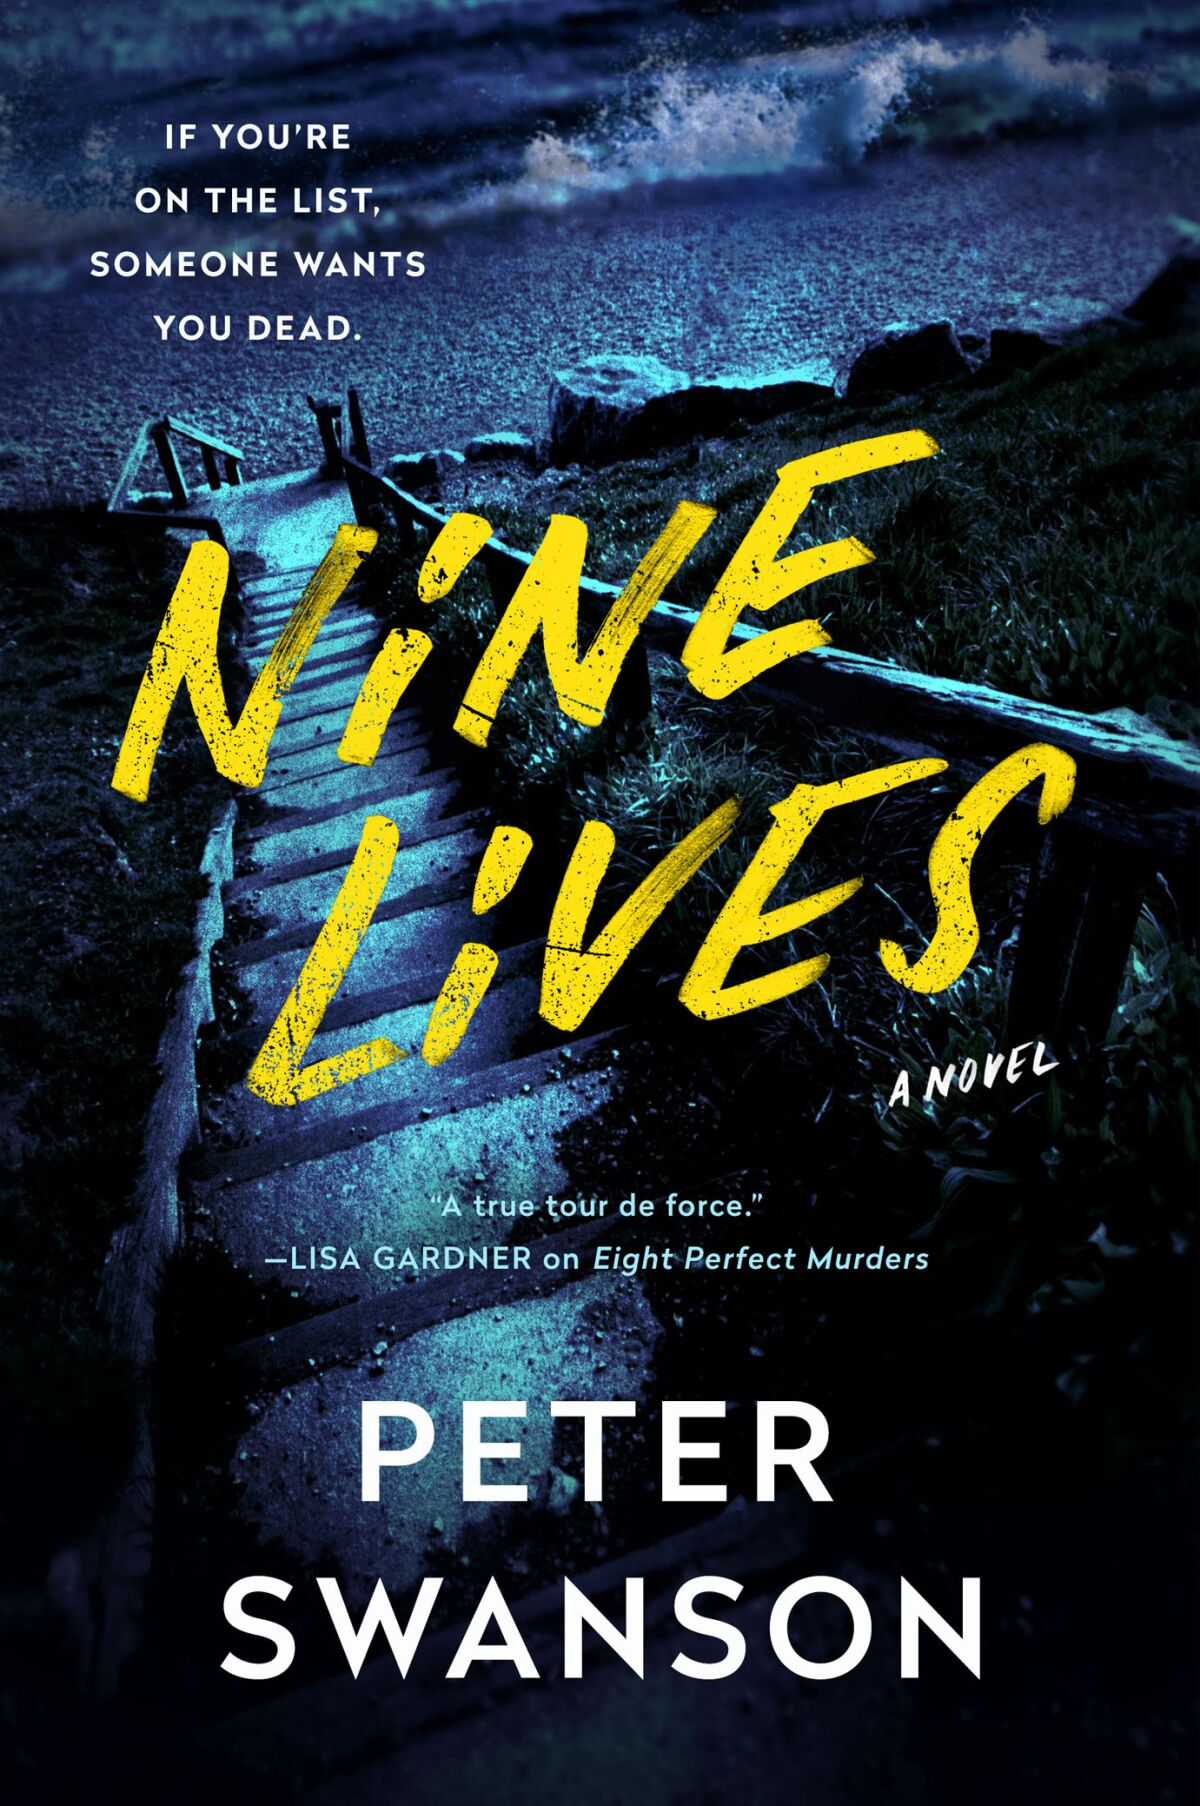 Book jacket for "Nine Lives" by Peter Swanson